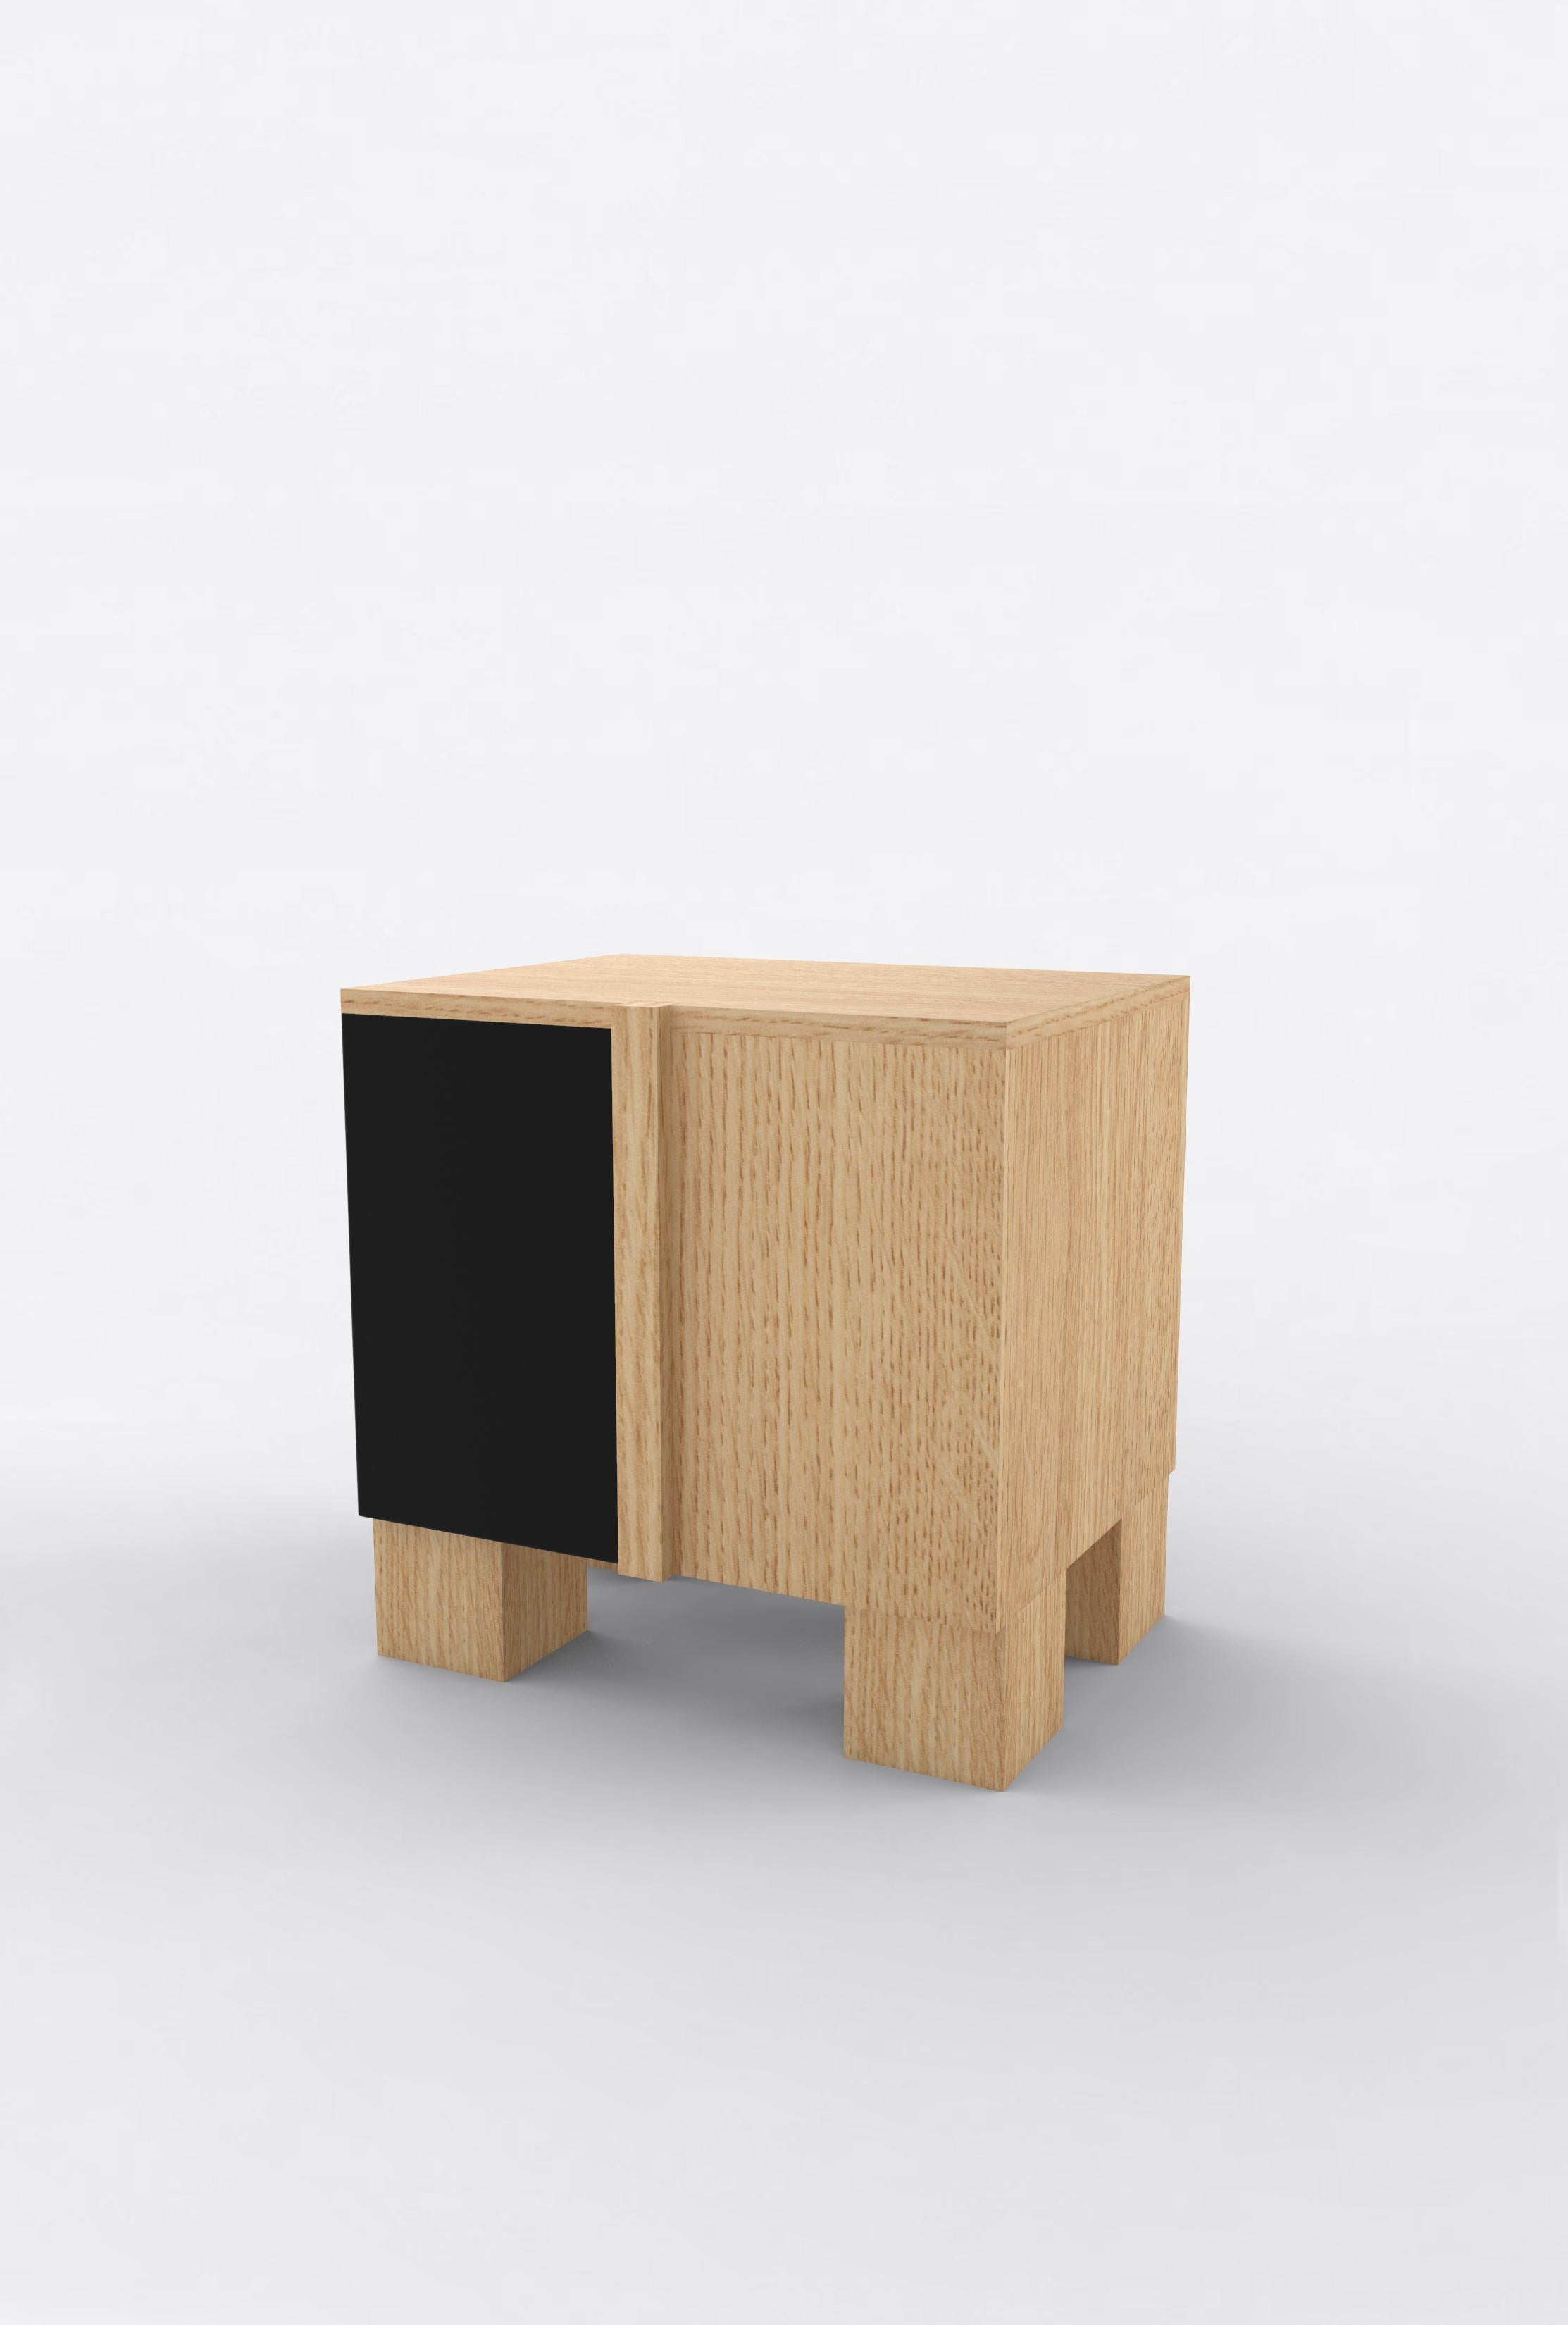 Orphan Work 100 Bedside
Shown in oak and black.
Available in natural oak with painted door. 
Measures: 24” W x 15” D x 22” H
2 doors with adjustable shelves. 

Orphan work is designed to complement in the heart of Soho, New York City. Each piece is